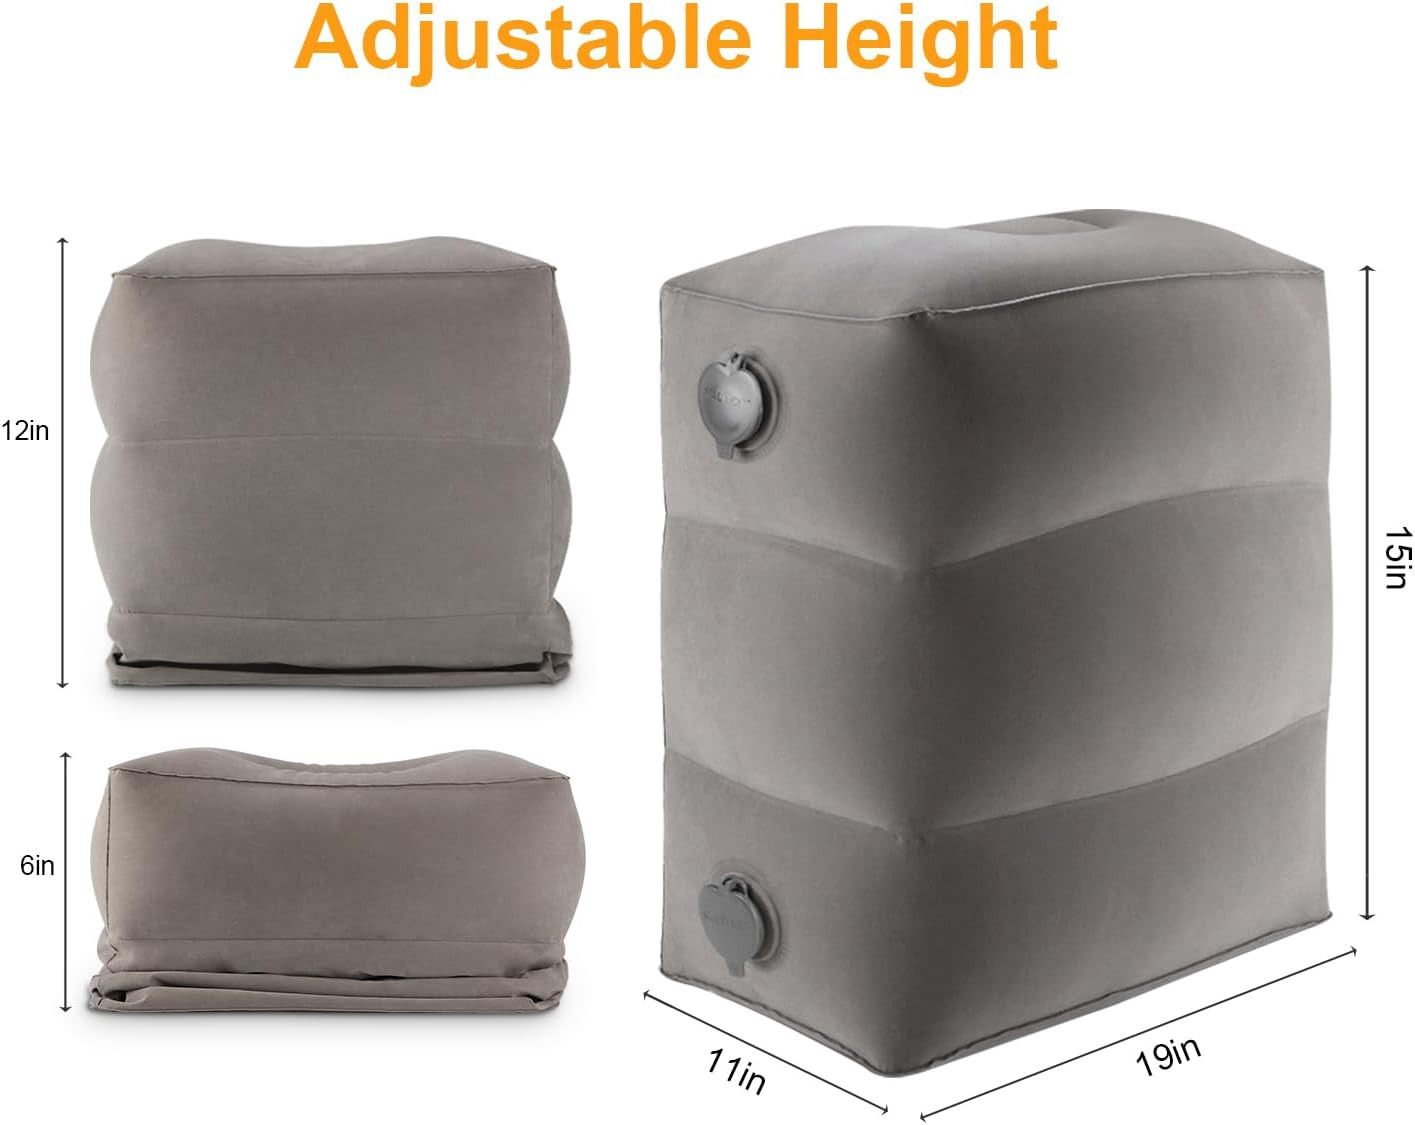 Gray color, inflation tools not included. Travel Footrest Pillow -  Inflatable Footrest for Kids Aircraft Bed Sleeping Flight Leg Pillow,  Inflatable